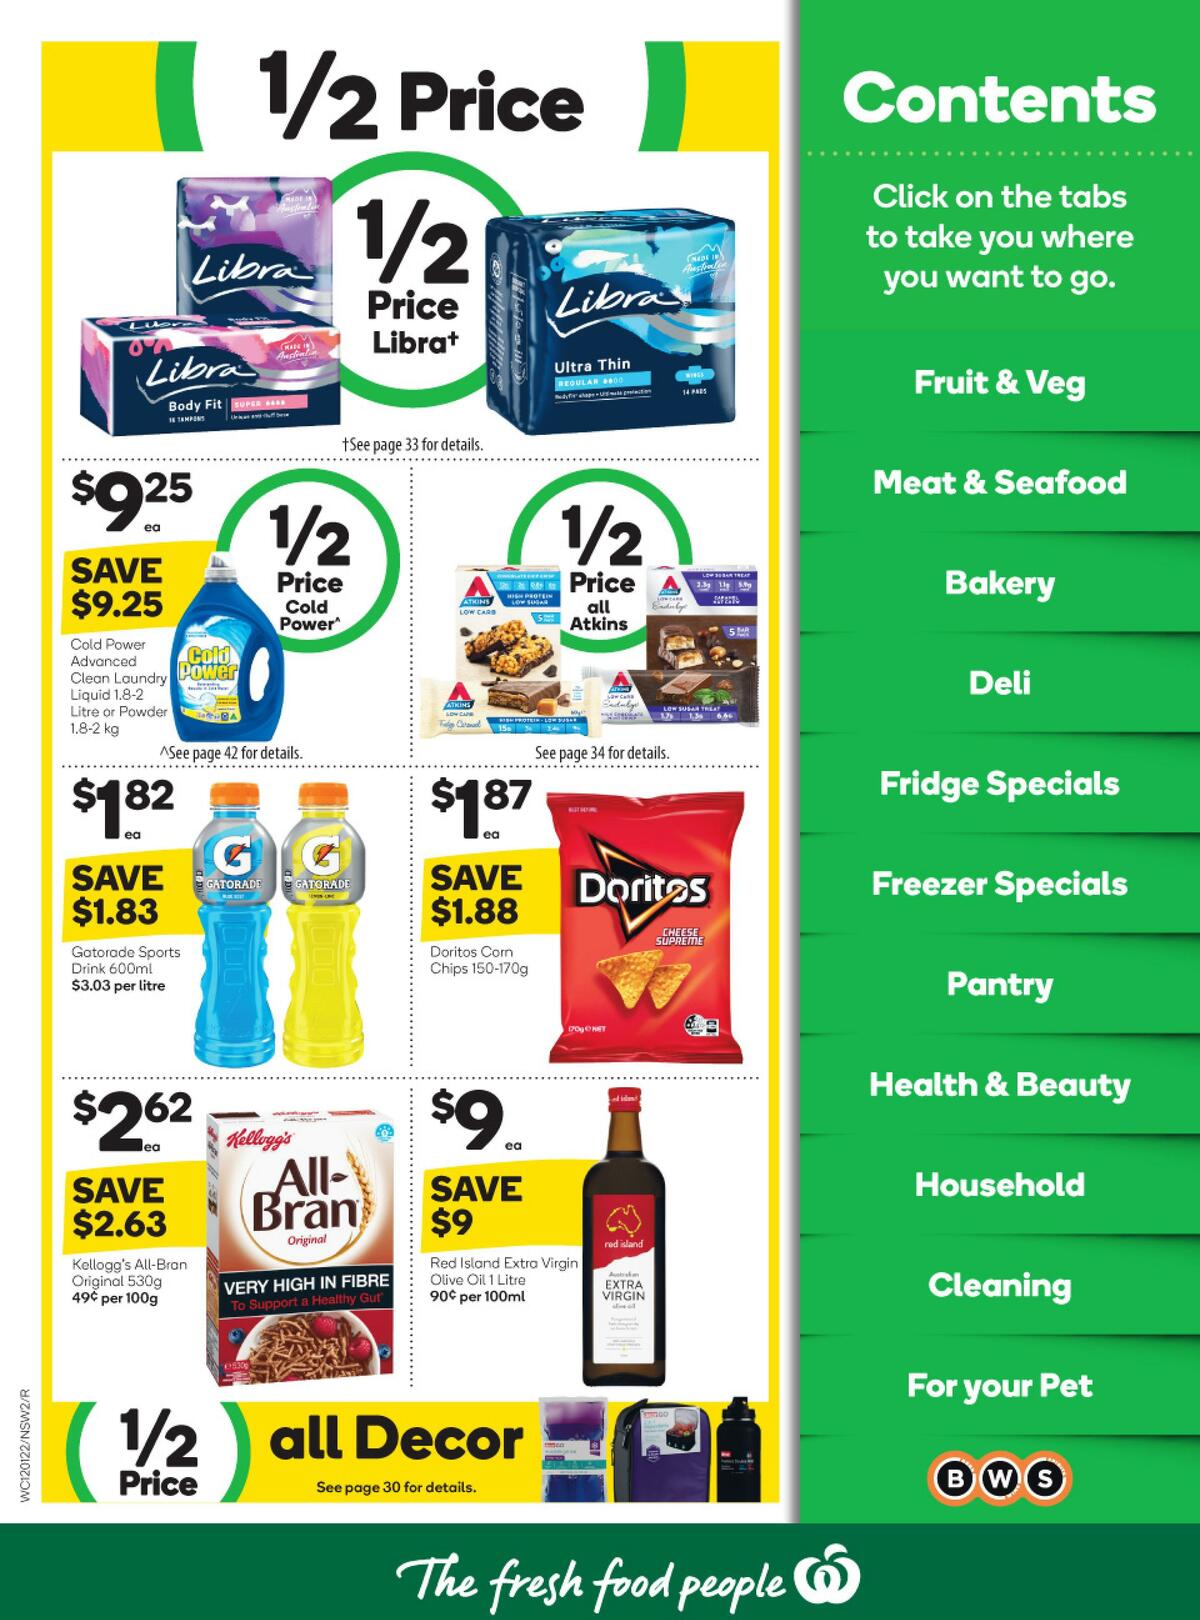 Woolworths Catalogues from 12 January